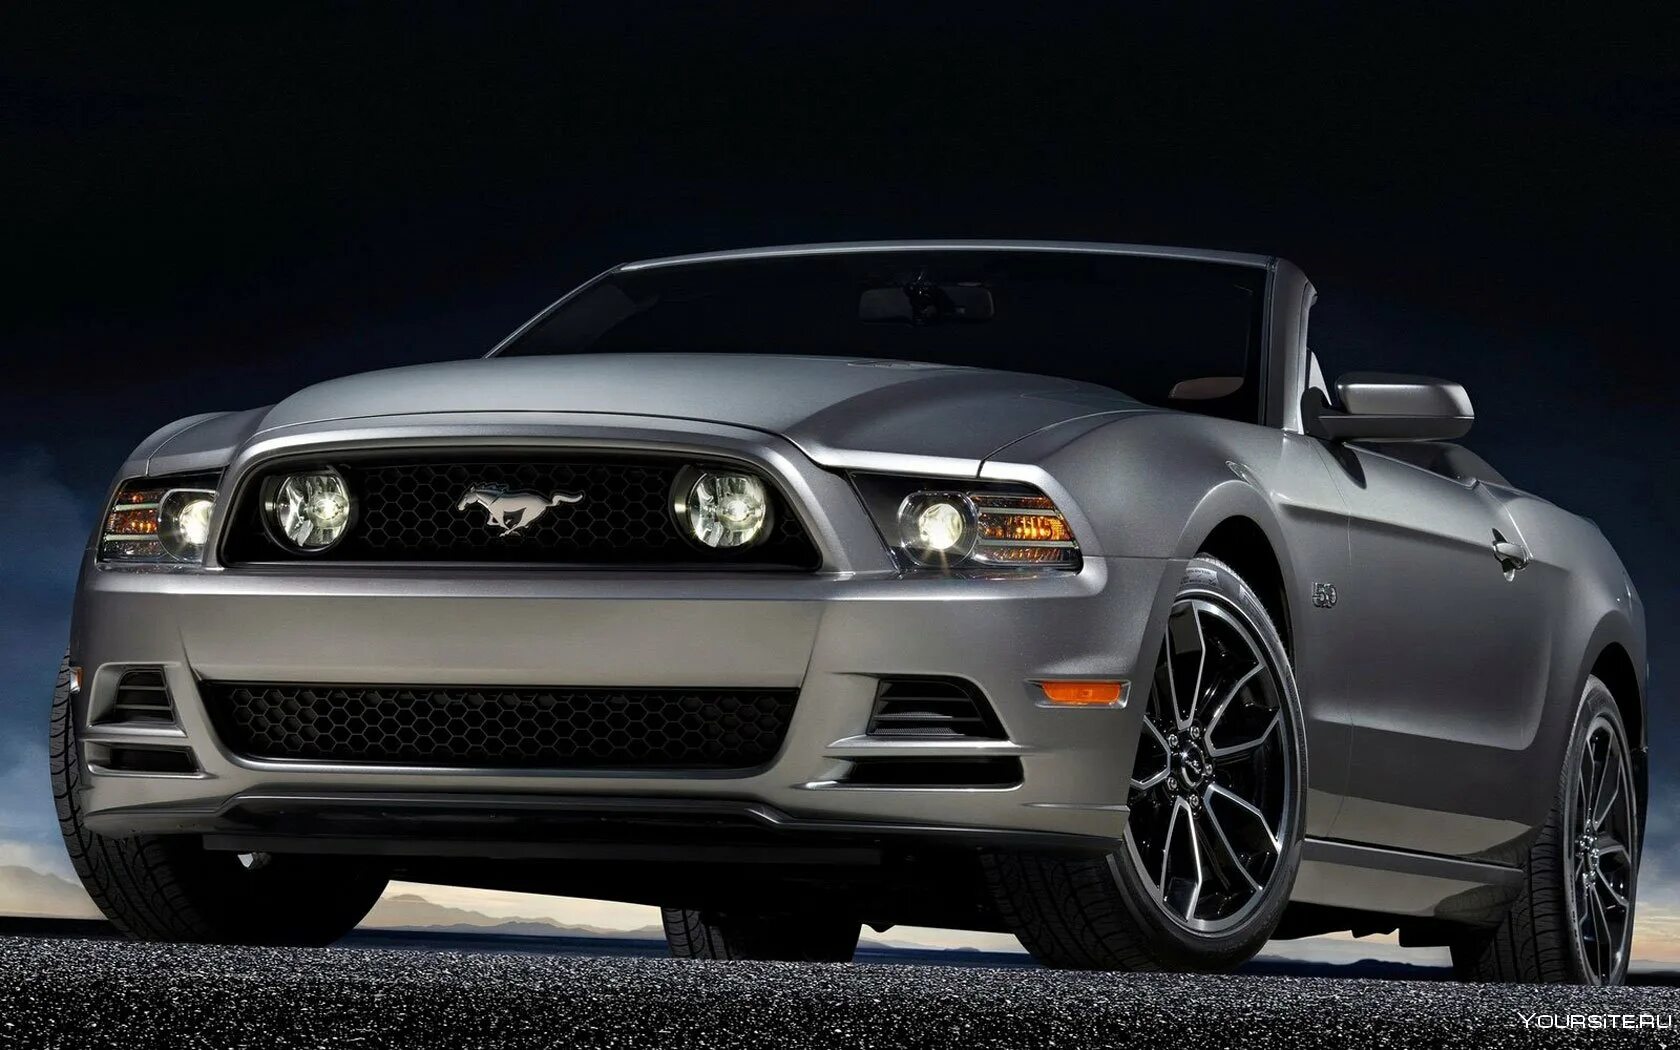 Ford Mustang 2013. Форд Мустанг 5.0. Ford Mustang gt 2013. Ford Mustang gt. Мустанг на русском языке